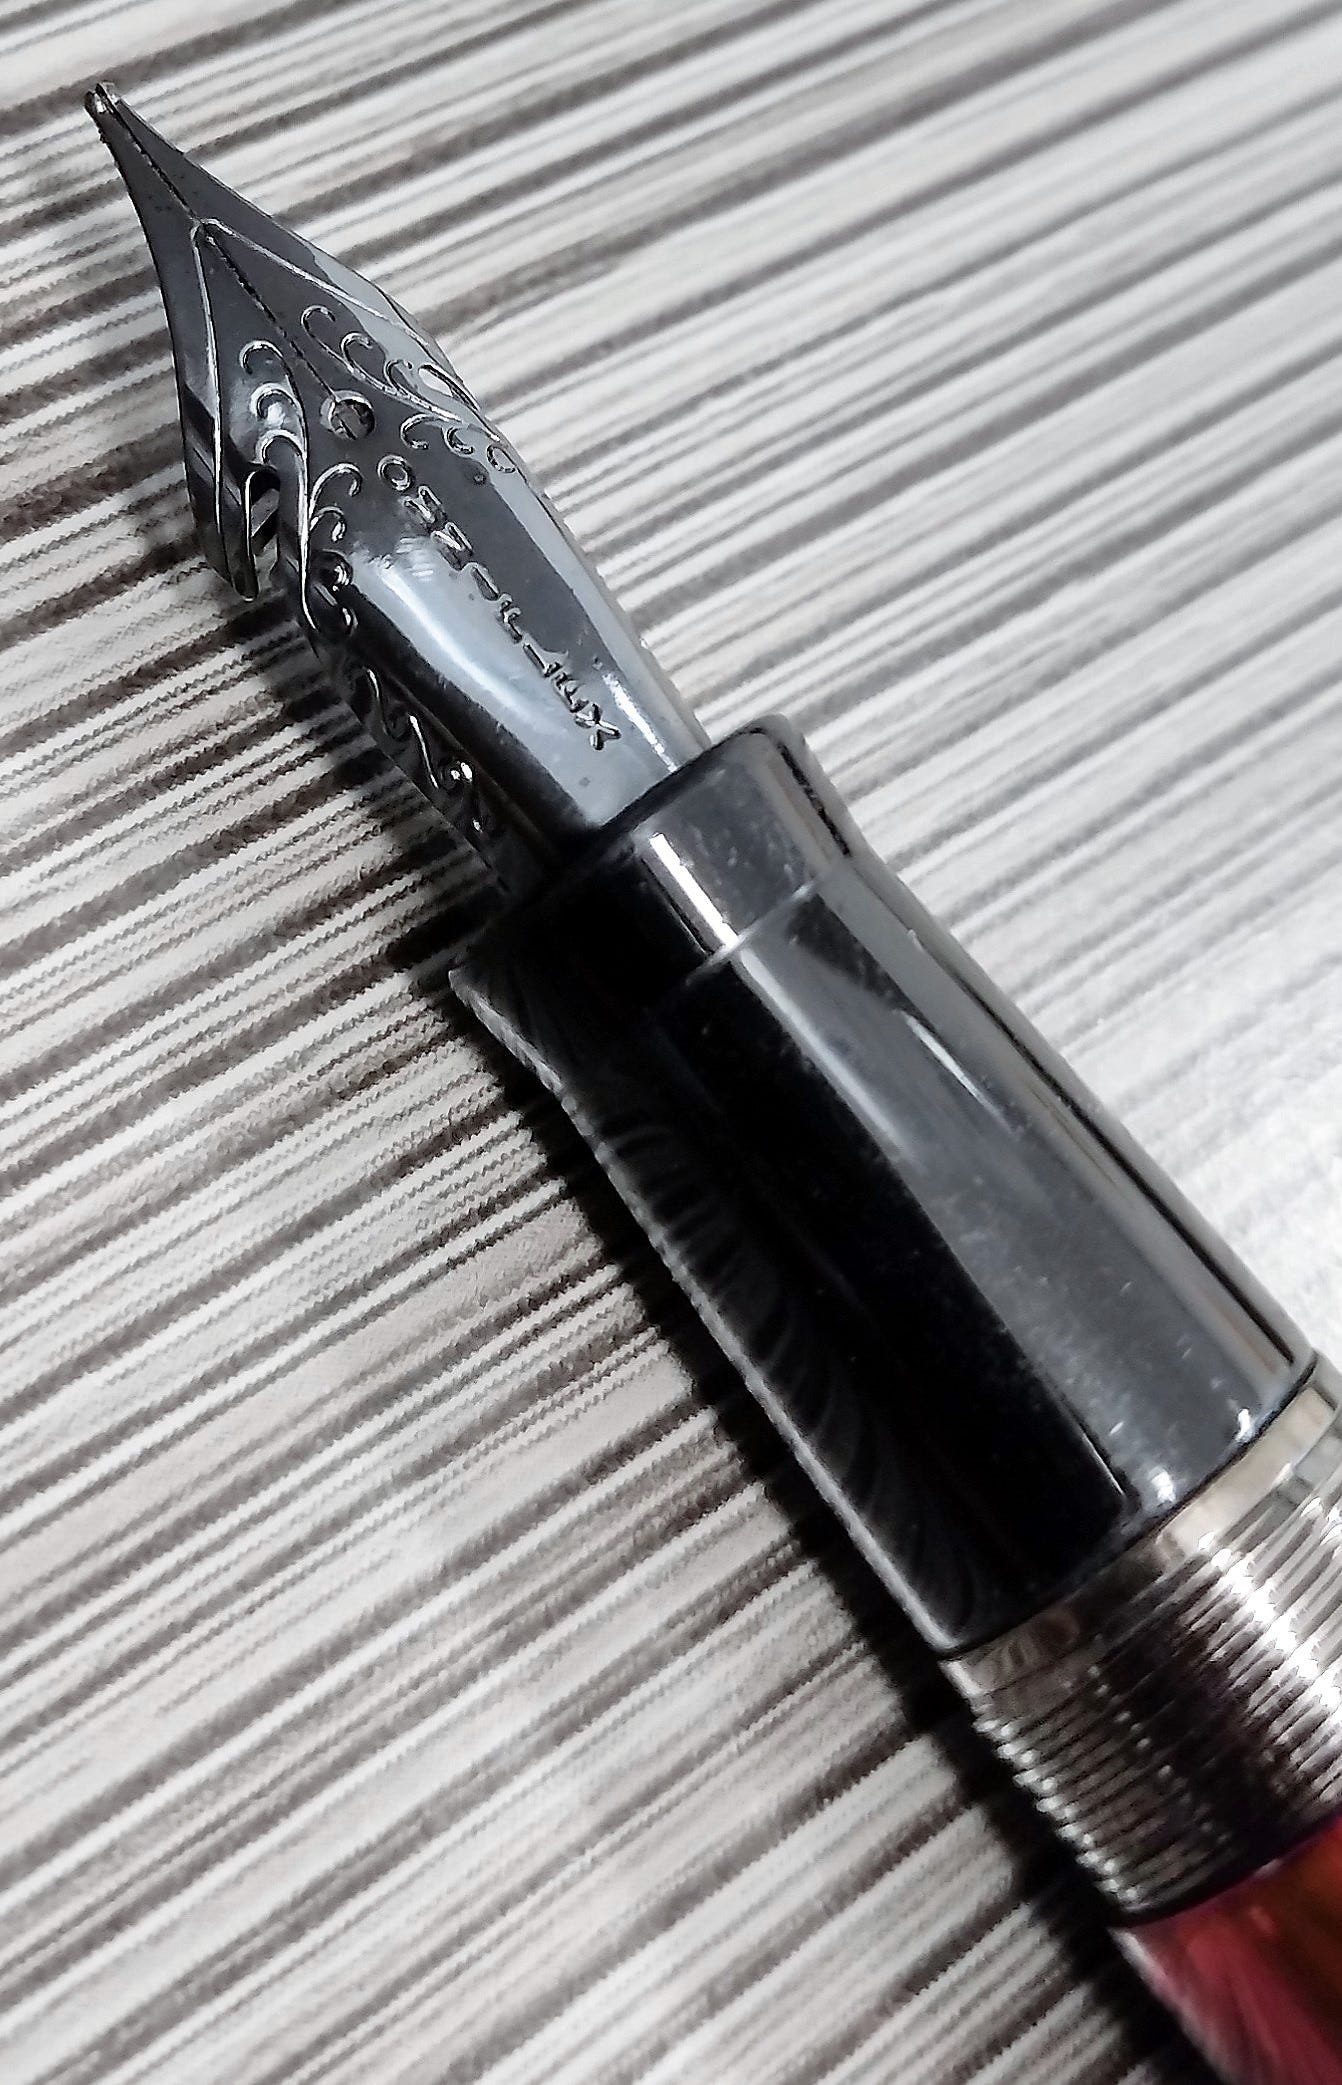 Review Revisited: The Pilot Custom 74 Fountain Pen — The Gentleman Stationer